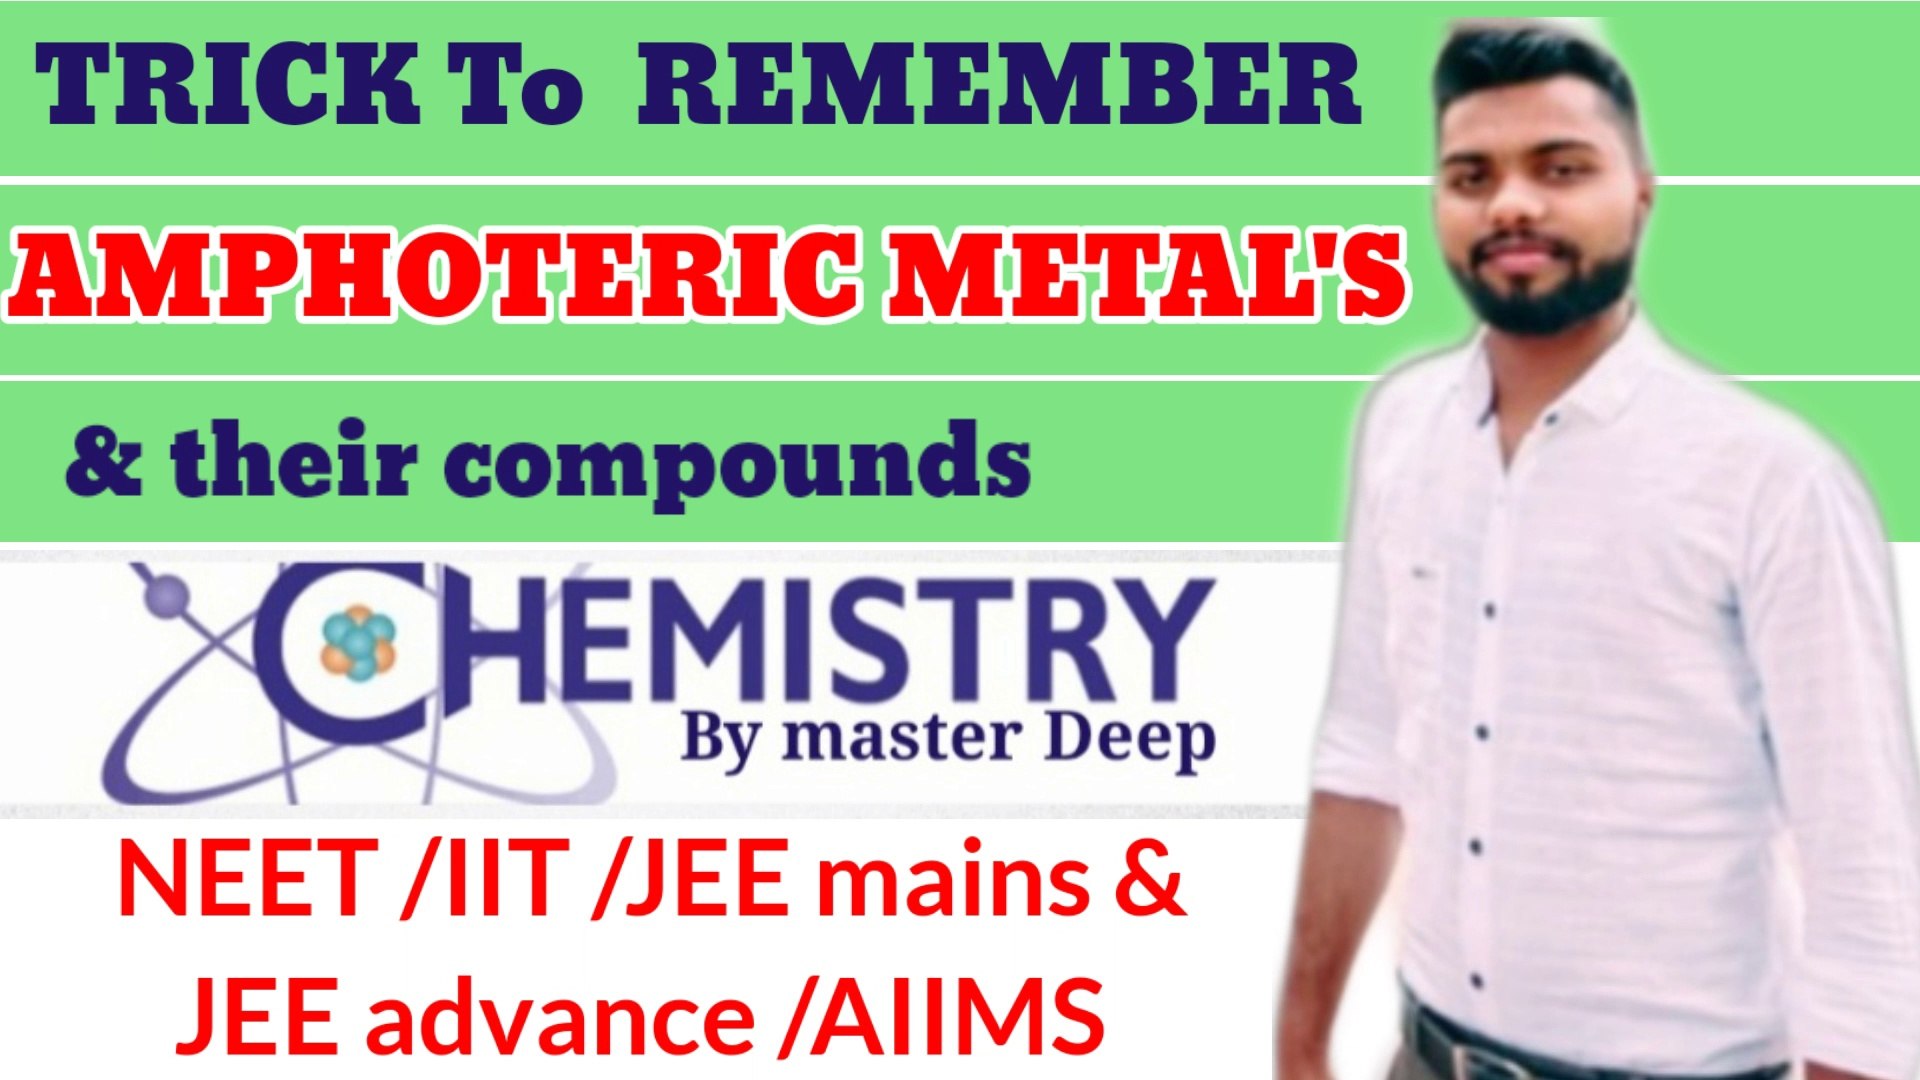 Master Deep  Amphoteric  metals learning trick. Amphoteric oxides trick. Master Deep chemistry trick